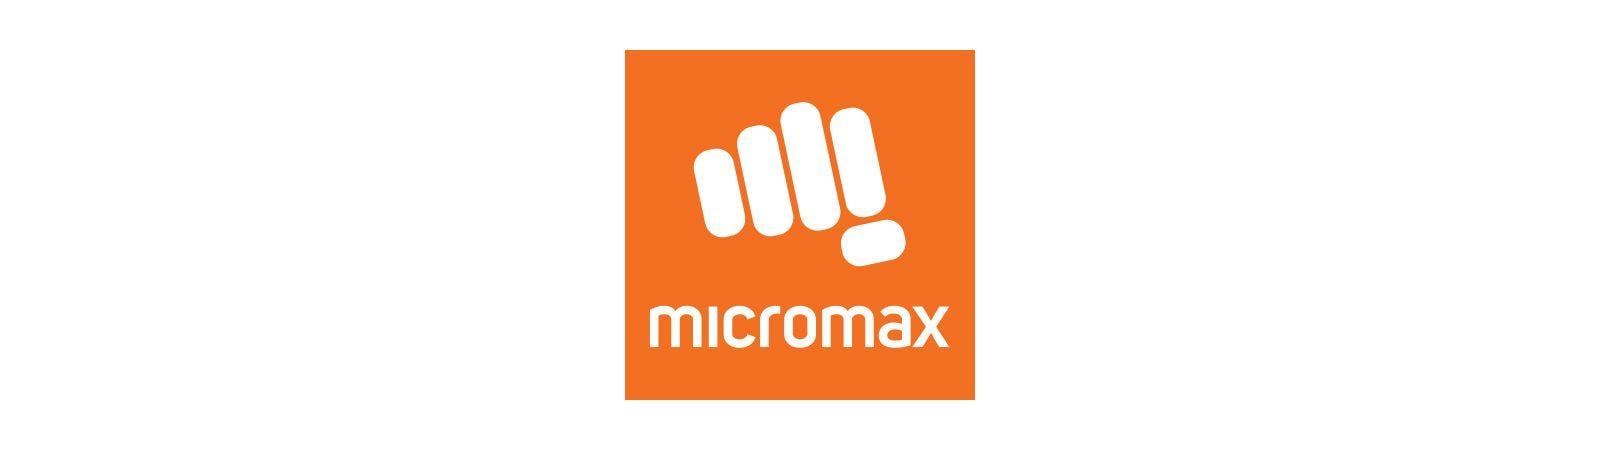 Micromax Logo - Micromax Informatics. Technology Sector. TA. A Private Equity Firm